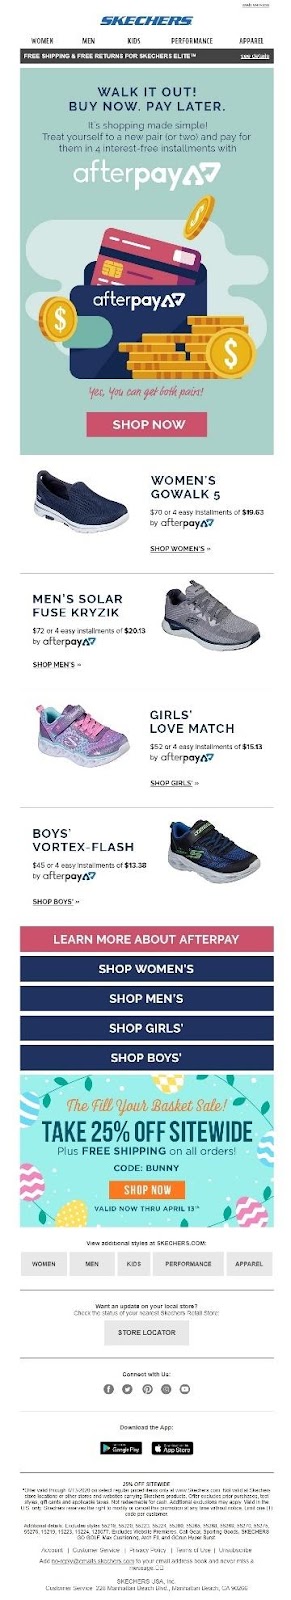 Skechers | example of great subject line and preheader text